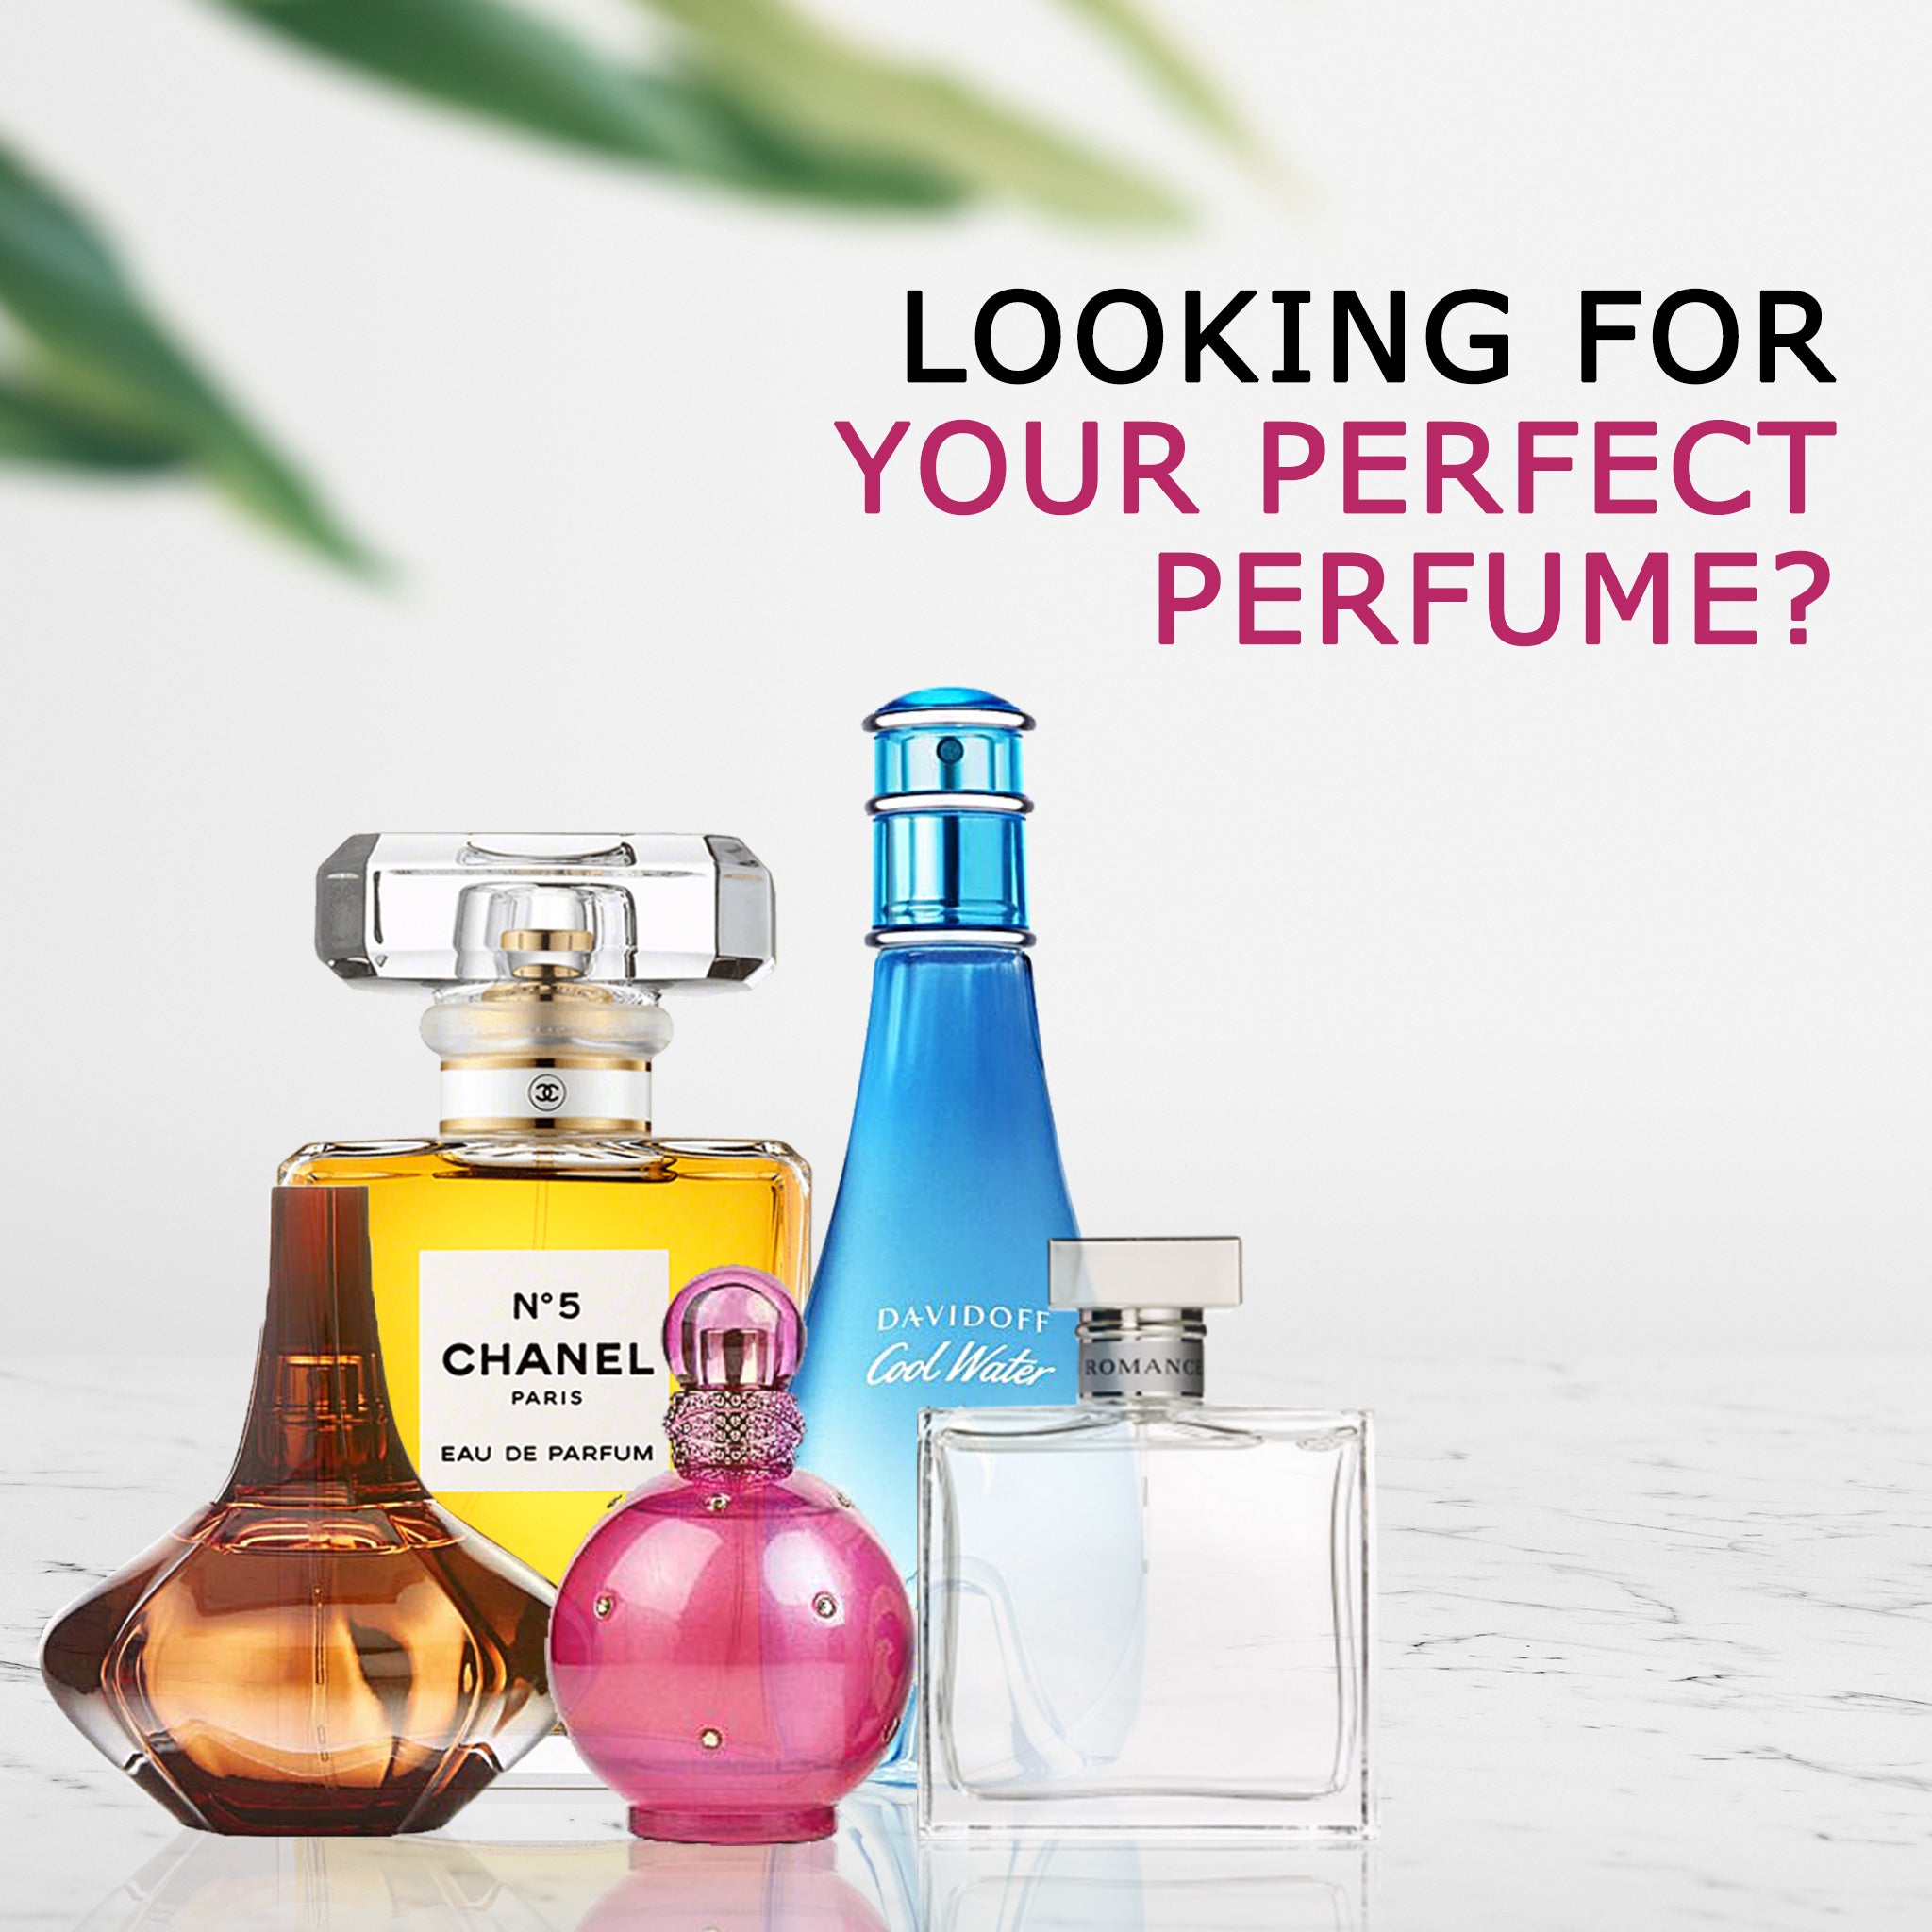 For the Love of Fragrance: An Ode to Scent From a Nosy Lady - AGEIST